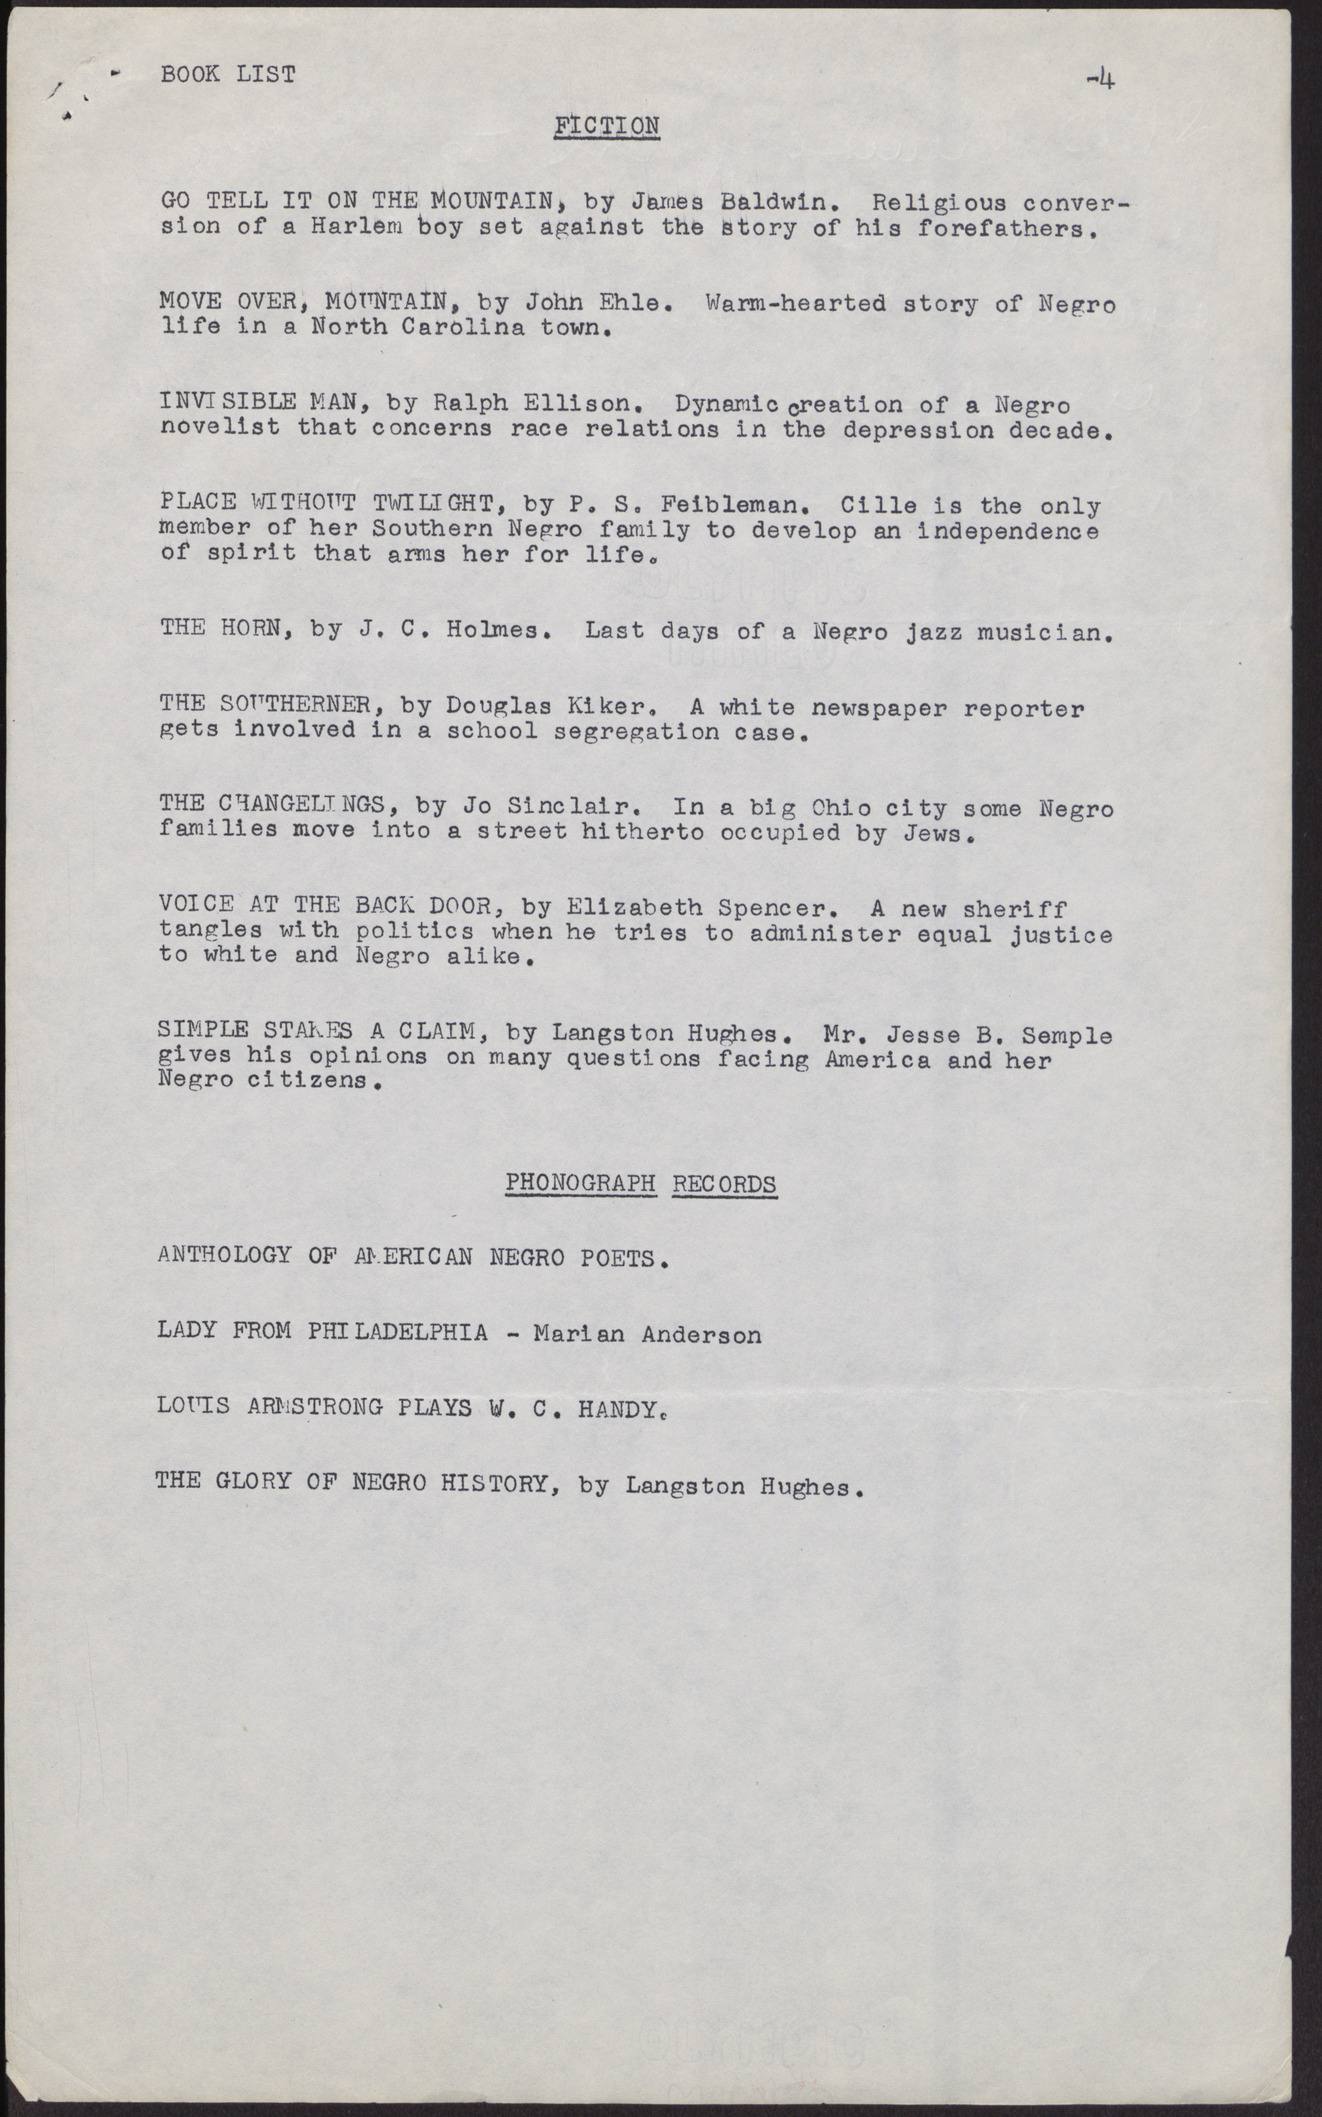 Suggested book list and phonograph records for the NAACP Anniversary and Negro History Celebrations (4 pages), no date, page 4